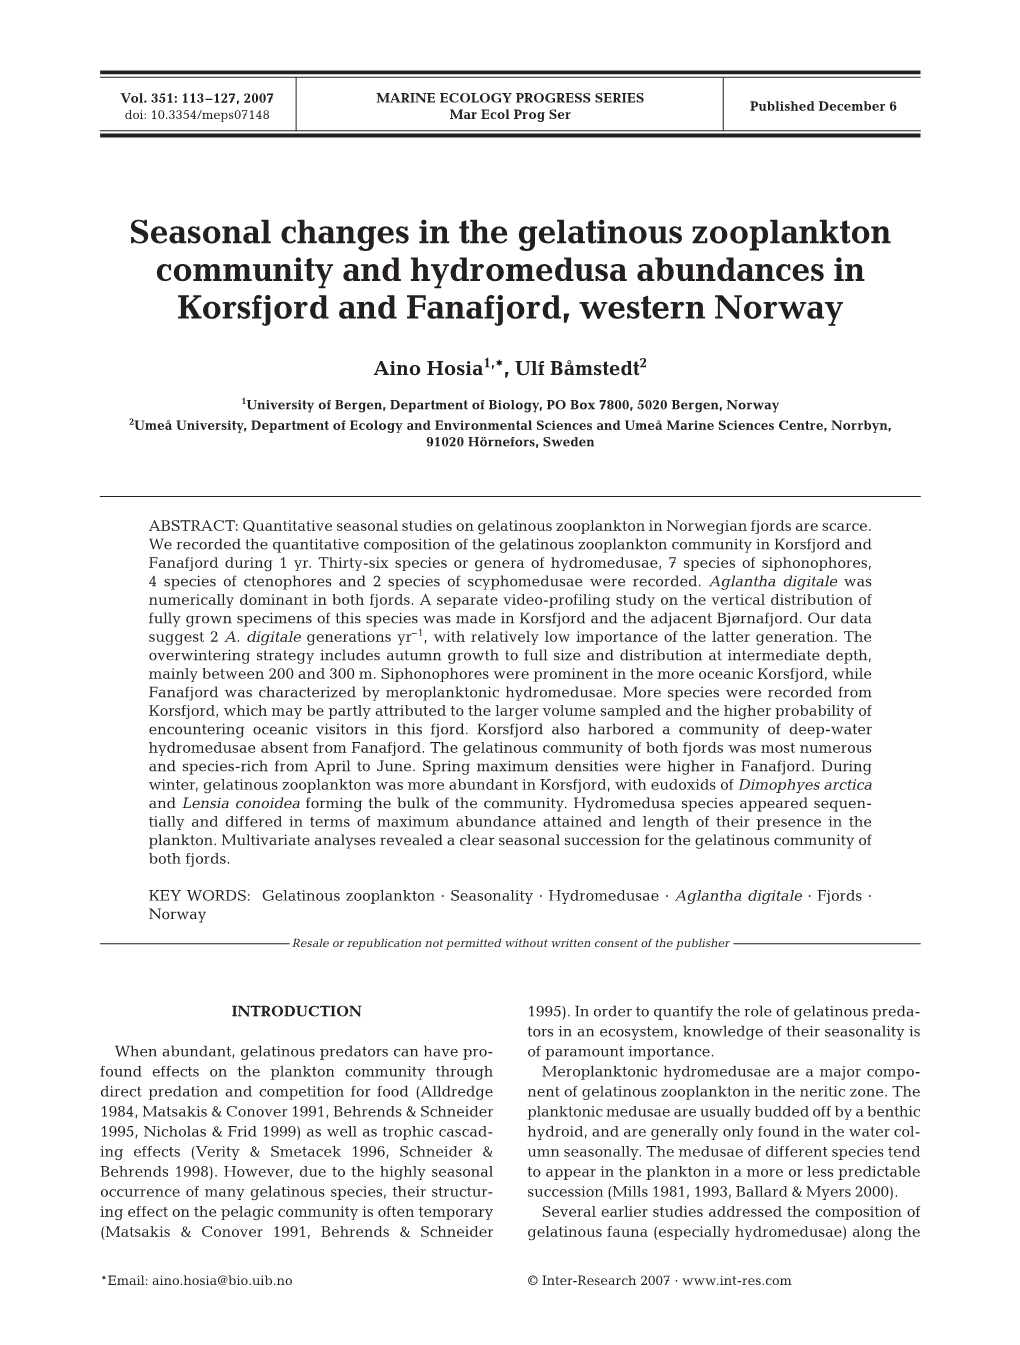 Seasonal Changes in the Gelatinous Zooplankton Community and Hydromedusa Abundances in Korsfjord and Fanafjord, Western Norway